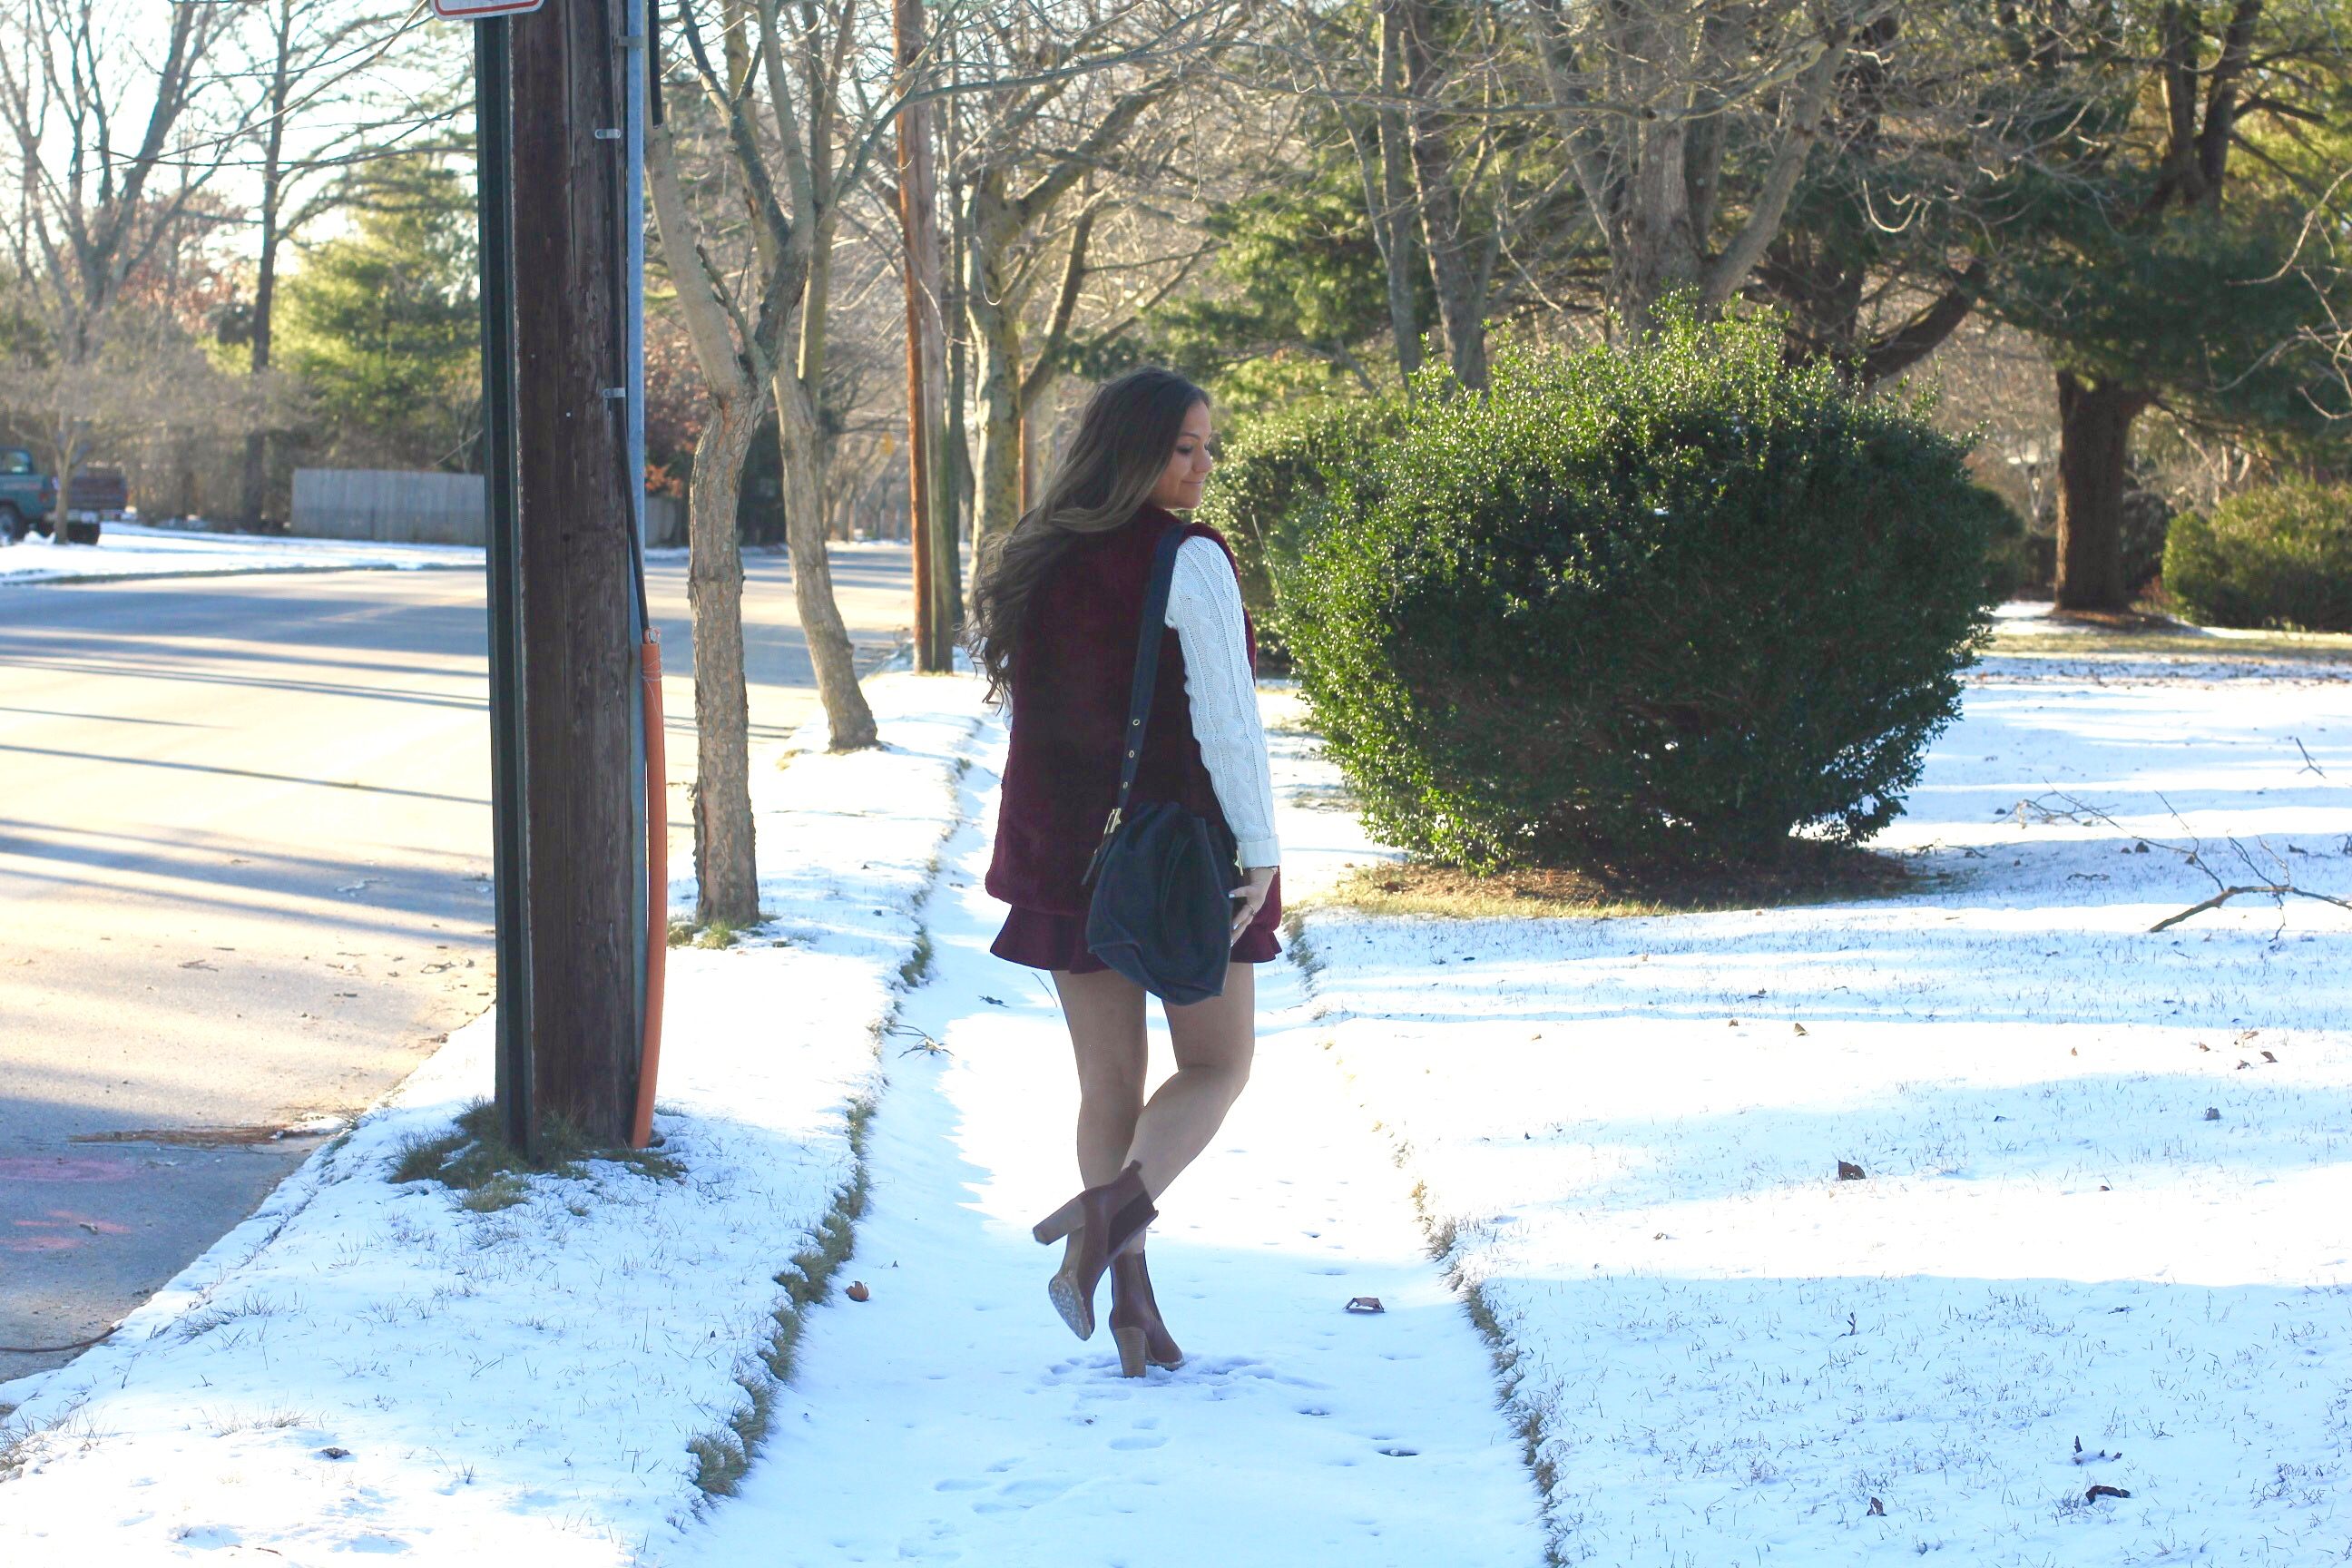 missyonmadison, melissa tierney, la blogger, winter style, ny blizzard, snow day style, tan leather heeled boots, maroon skater skirt, maroon faux fur vest, maroon vest, winter hair style, anne klein watch, black leather bucket bag, heeled ankle boots, white cable knit sweater, womens white cable knit sweater, ny blogger, tbt, throwback thursday, winter hair trends, brunette hair style, snow style, how to wear maroon,